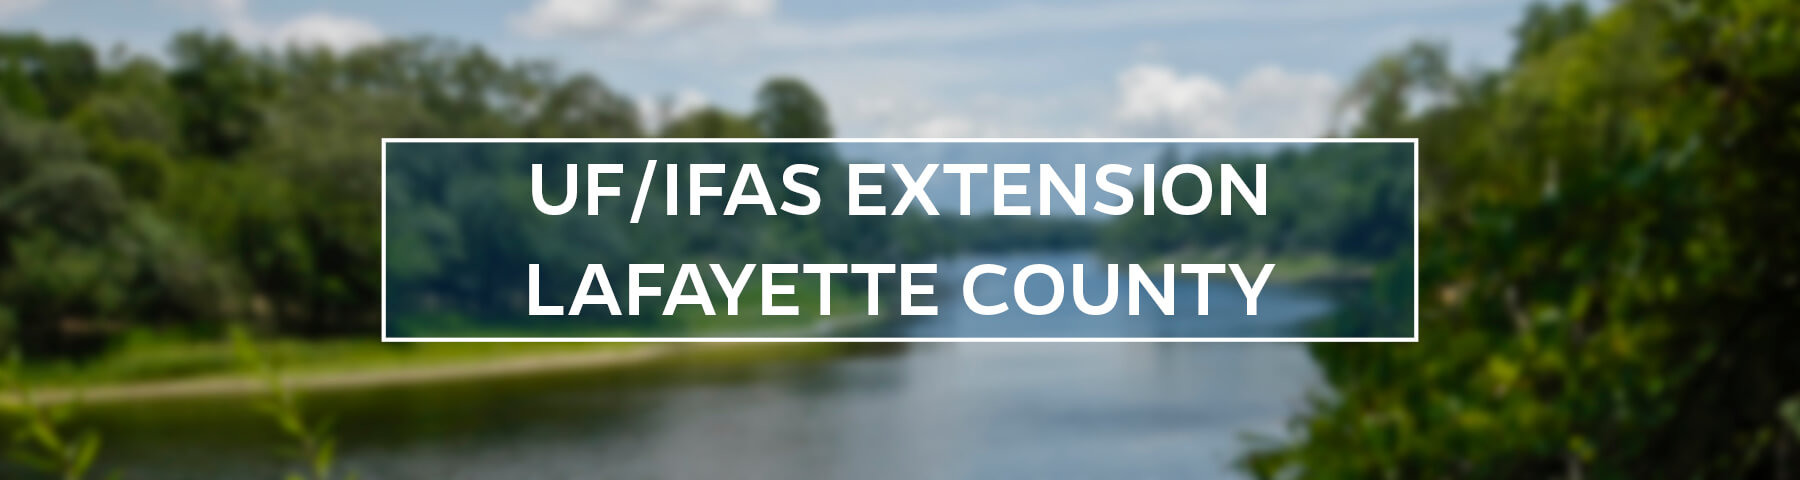 UF/IFAS Extension Lafayette County